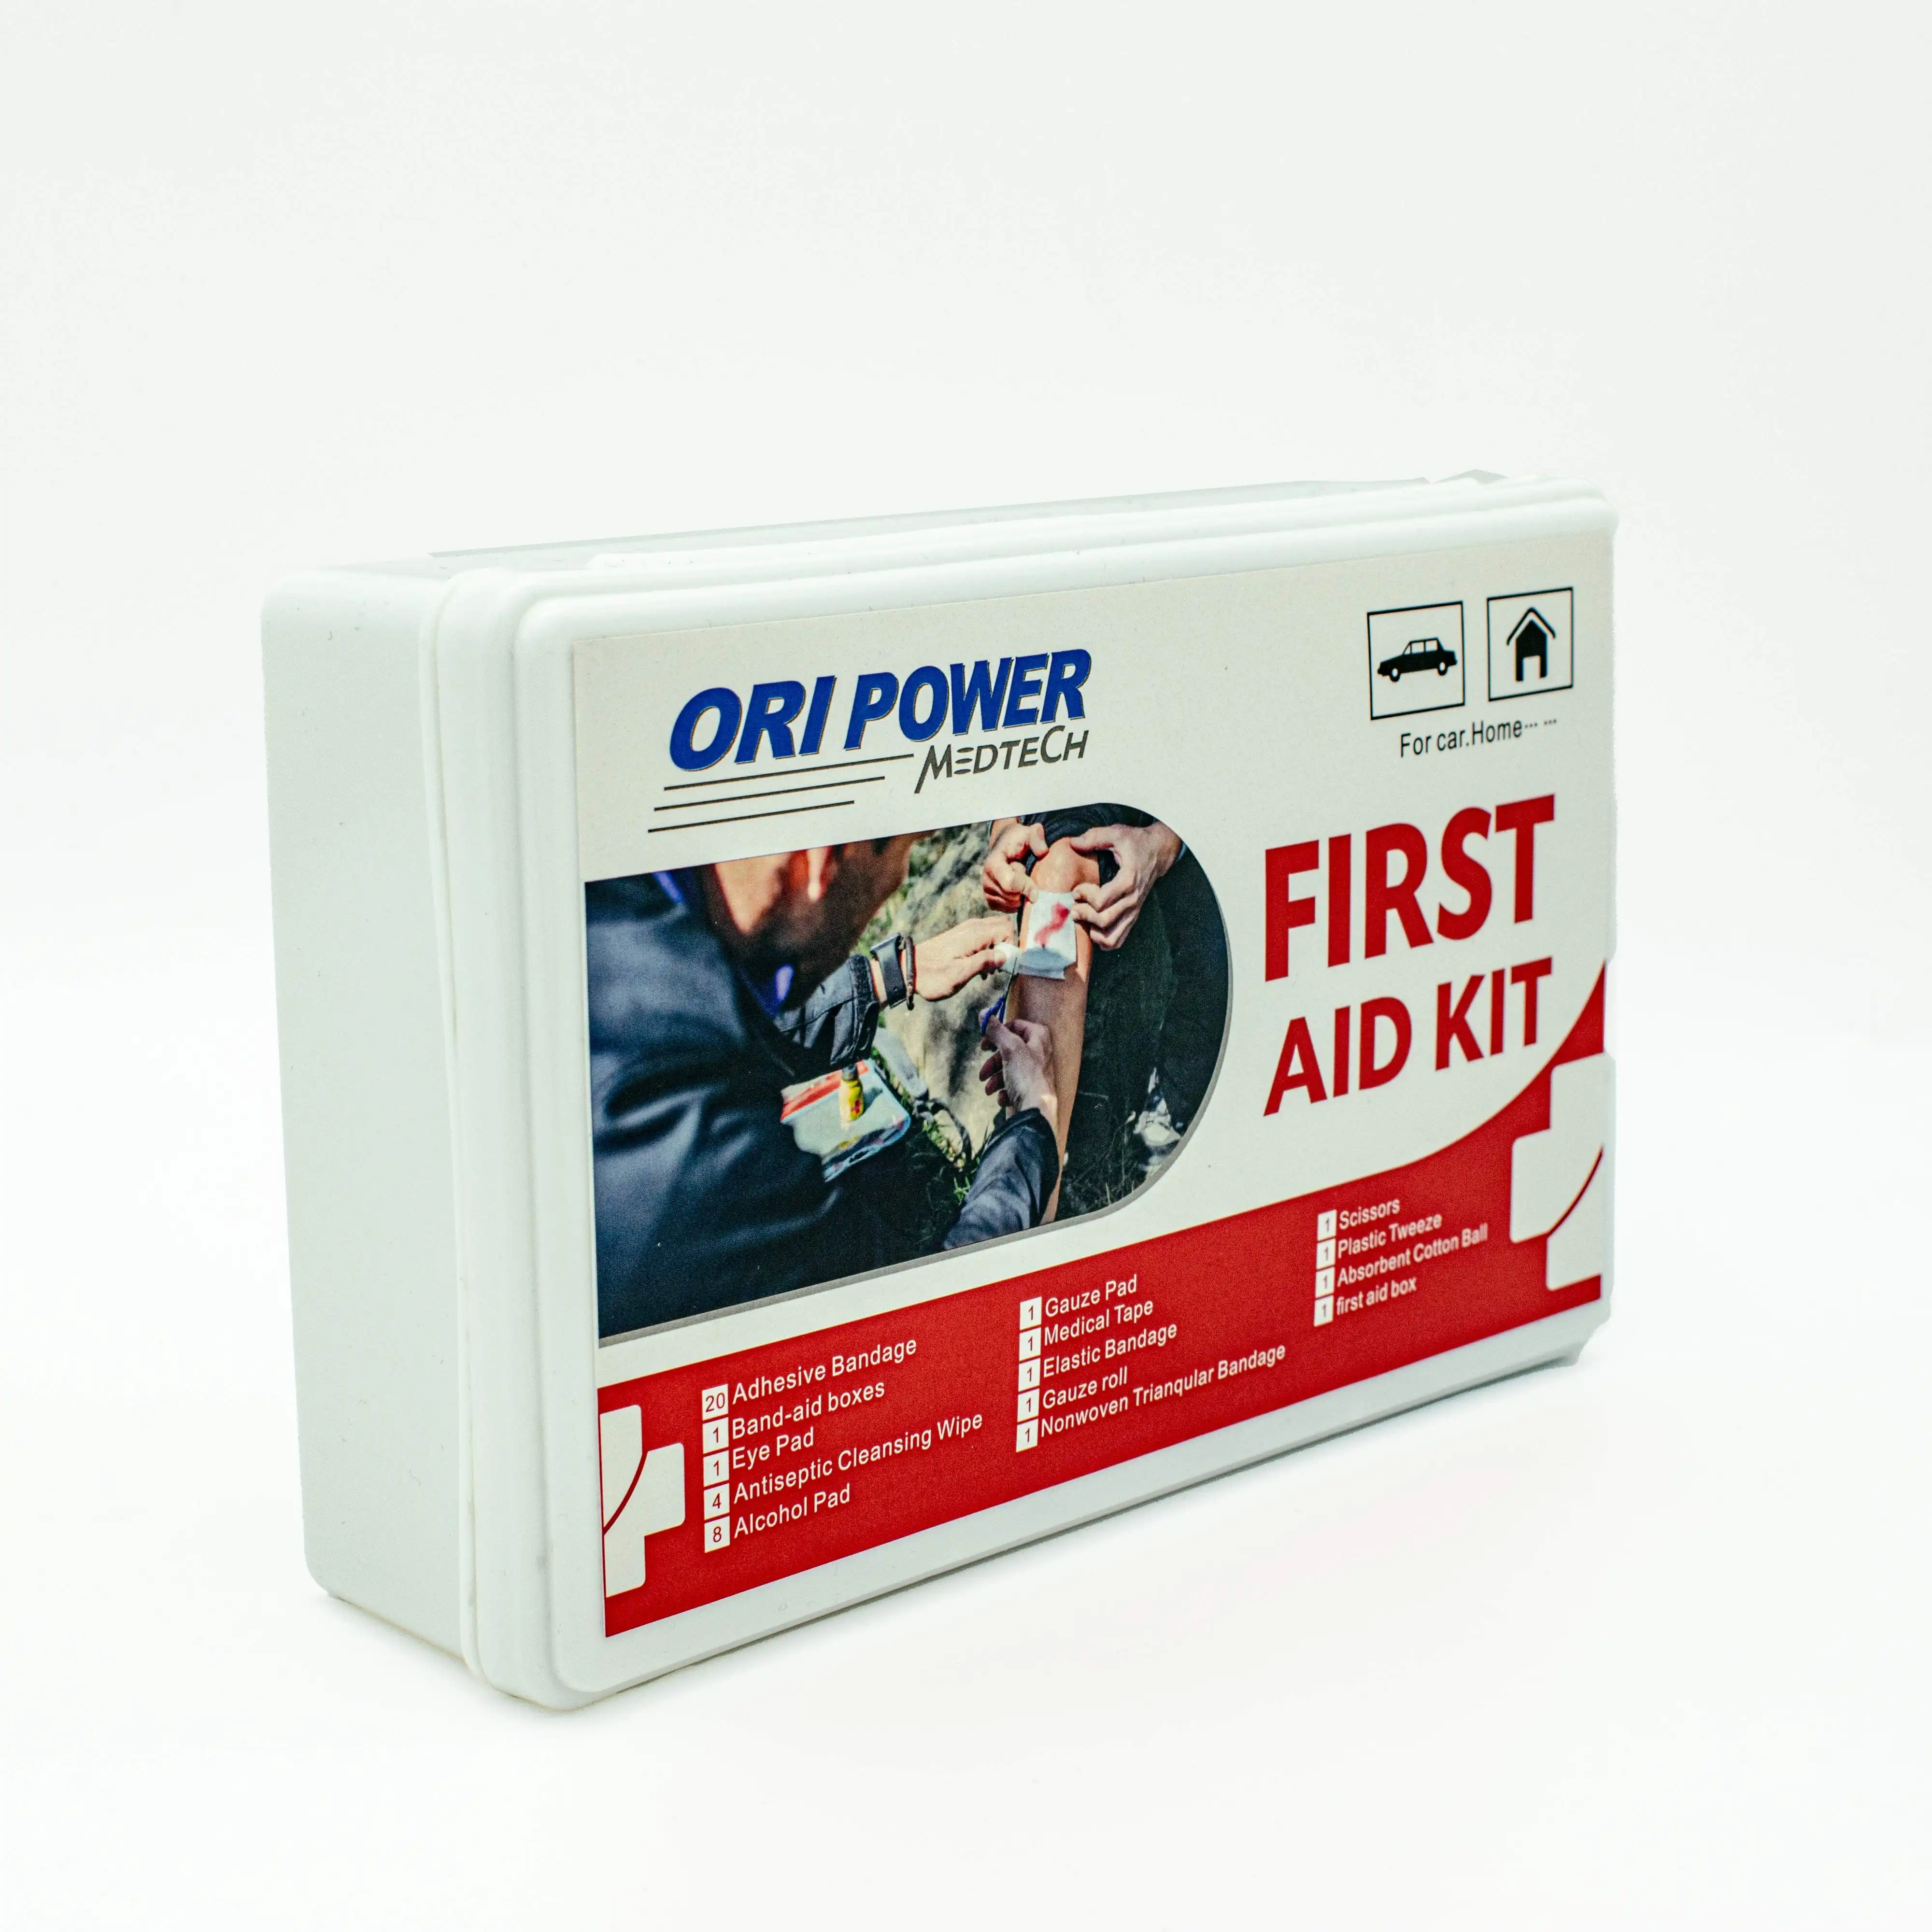 Oripower solid color first aid pp box For outdoors portable to carry medical kit